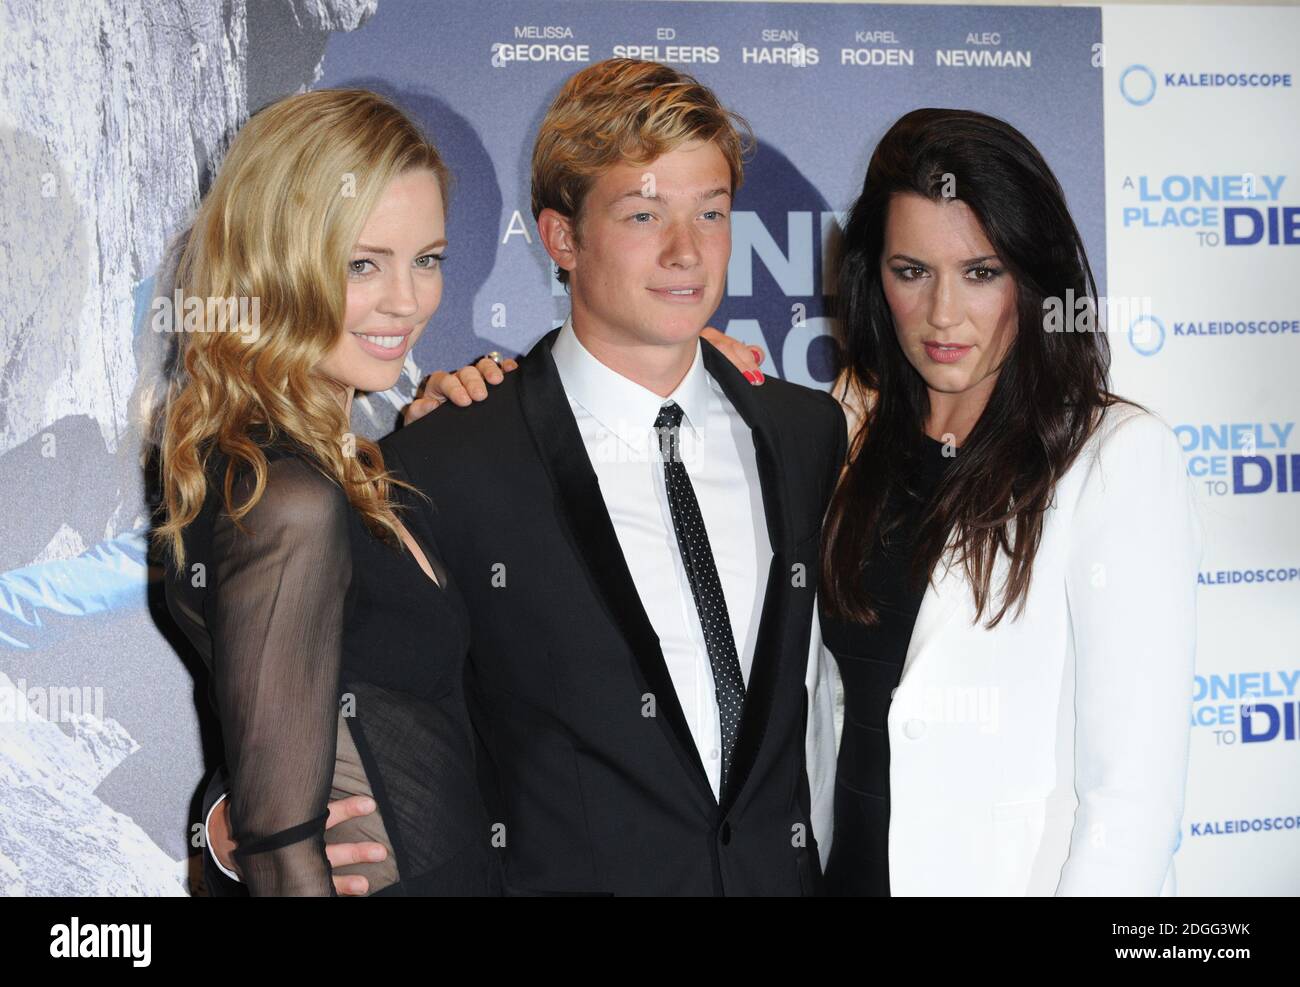 Melissa George, Ed Speleers and Kate Magowan at the Fan Premiere of A Lonely Place To Die, the Empire Cinema, Leicester Square, London Stock Photo